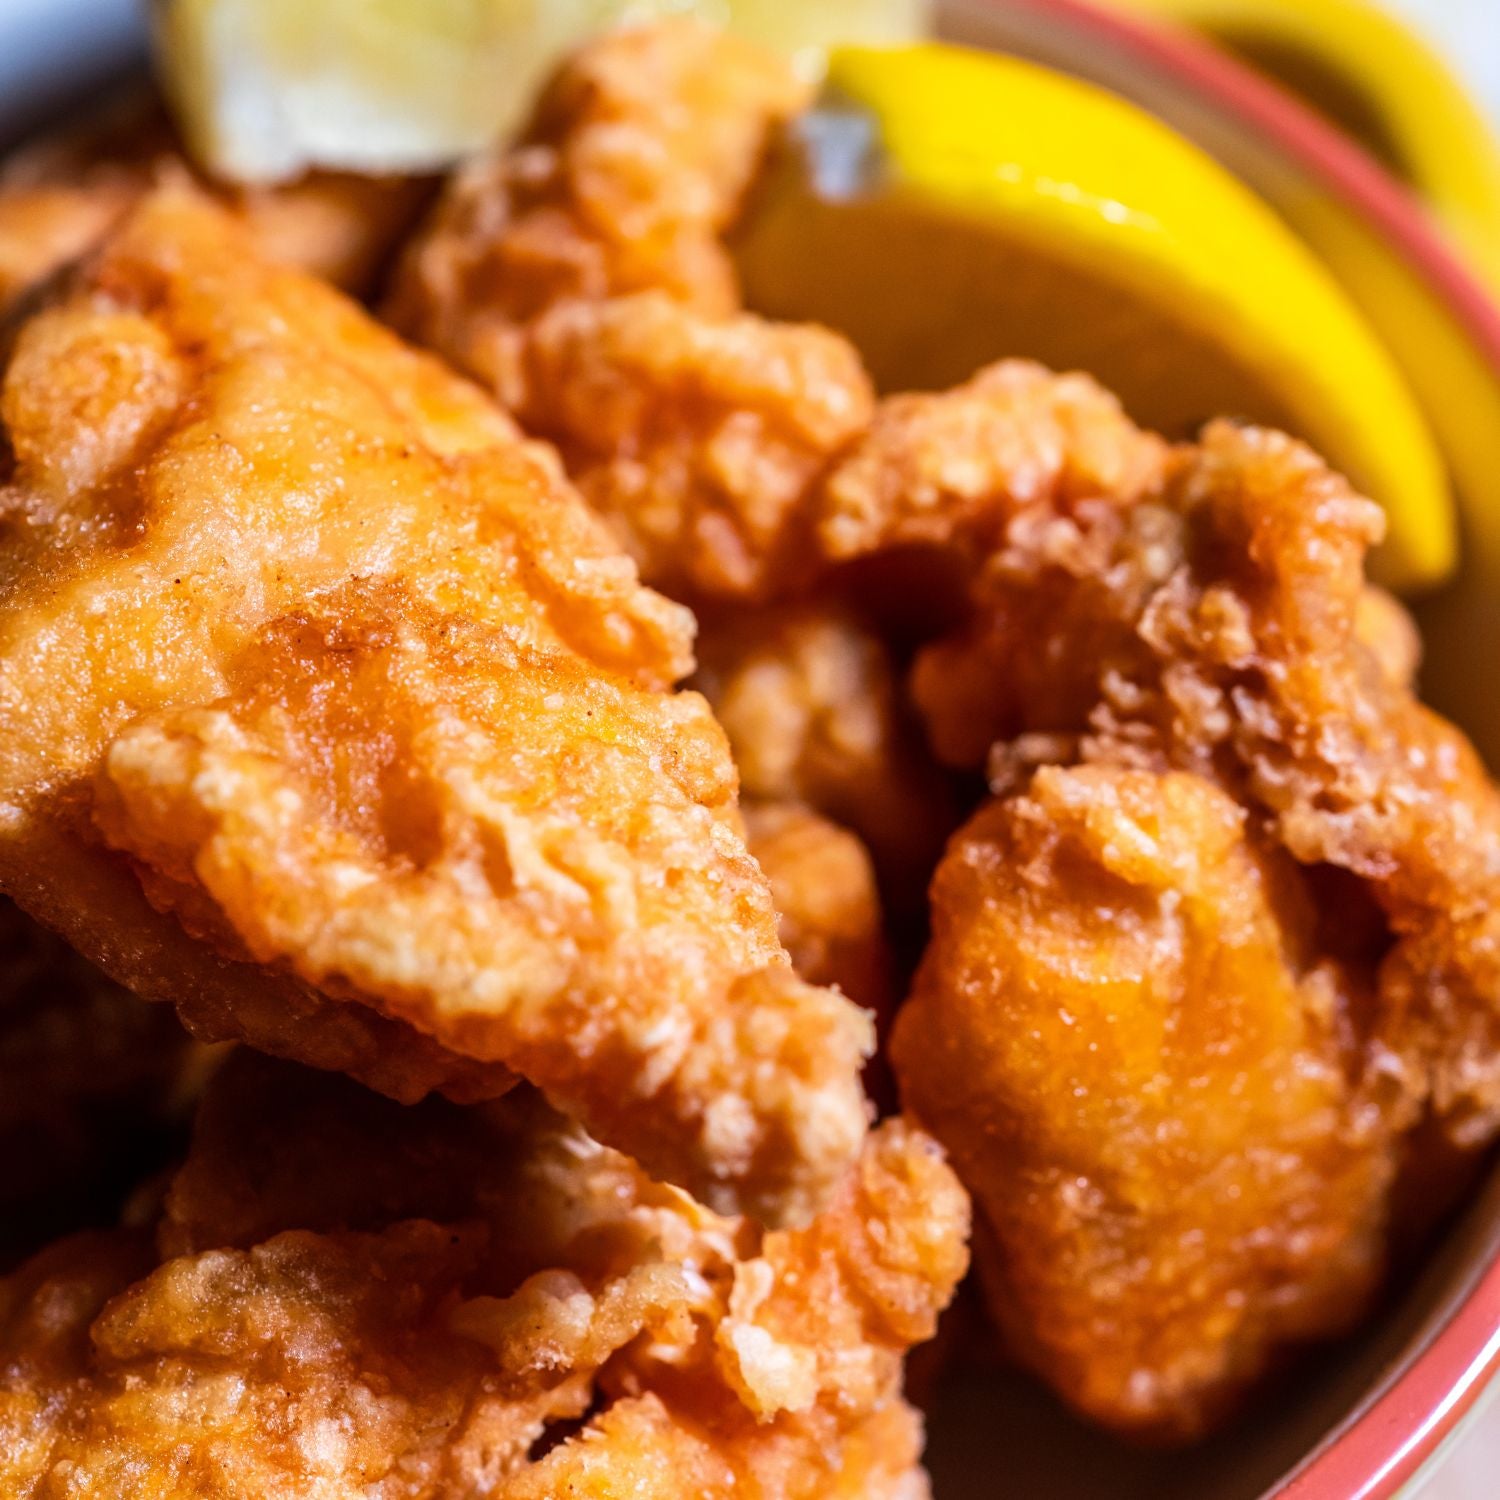 A plate of crispy and golden fried chicken that is perfect for a comfort food meal